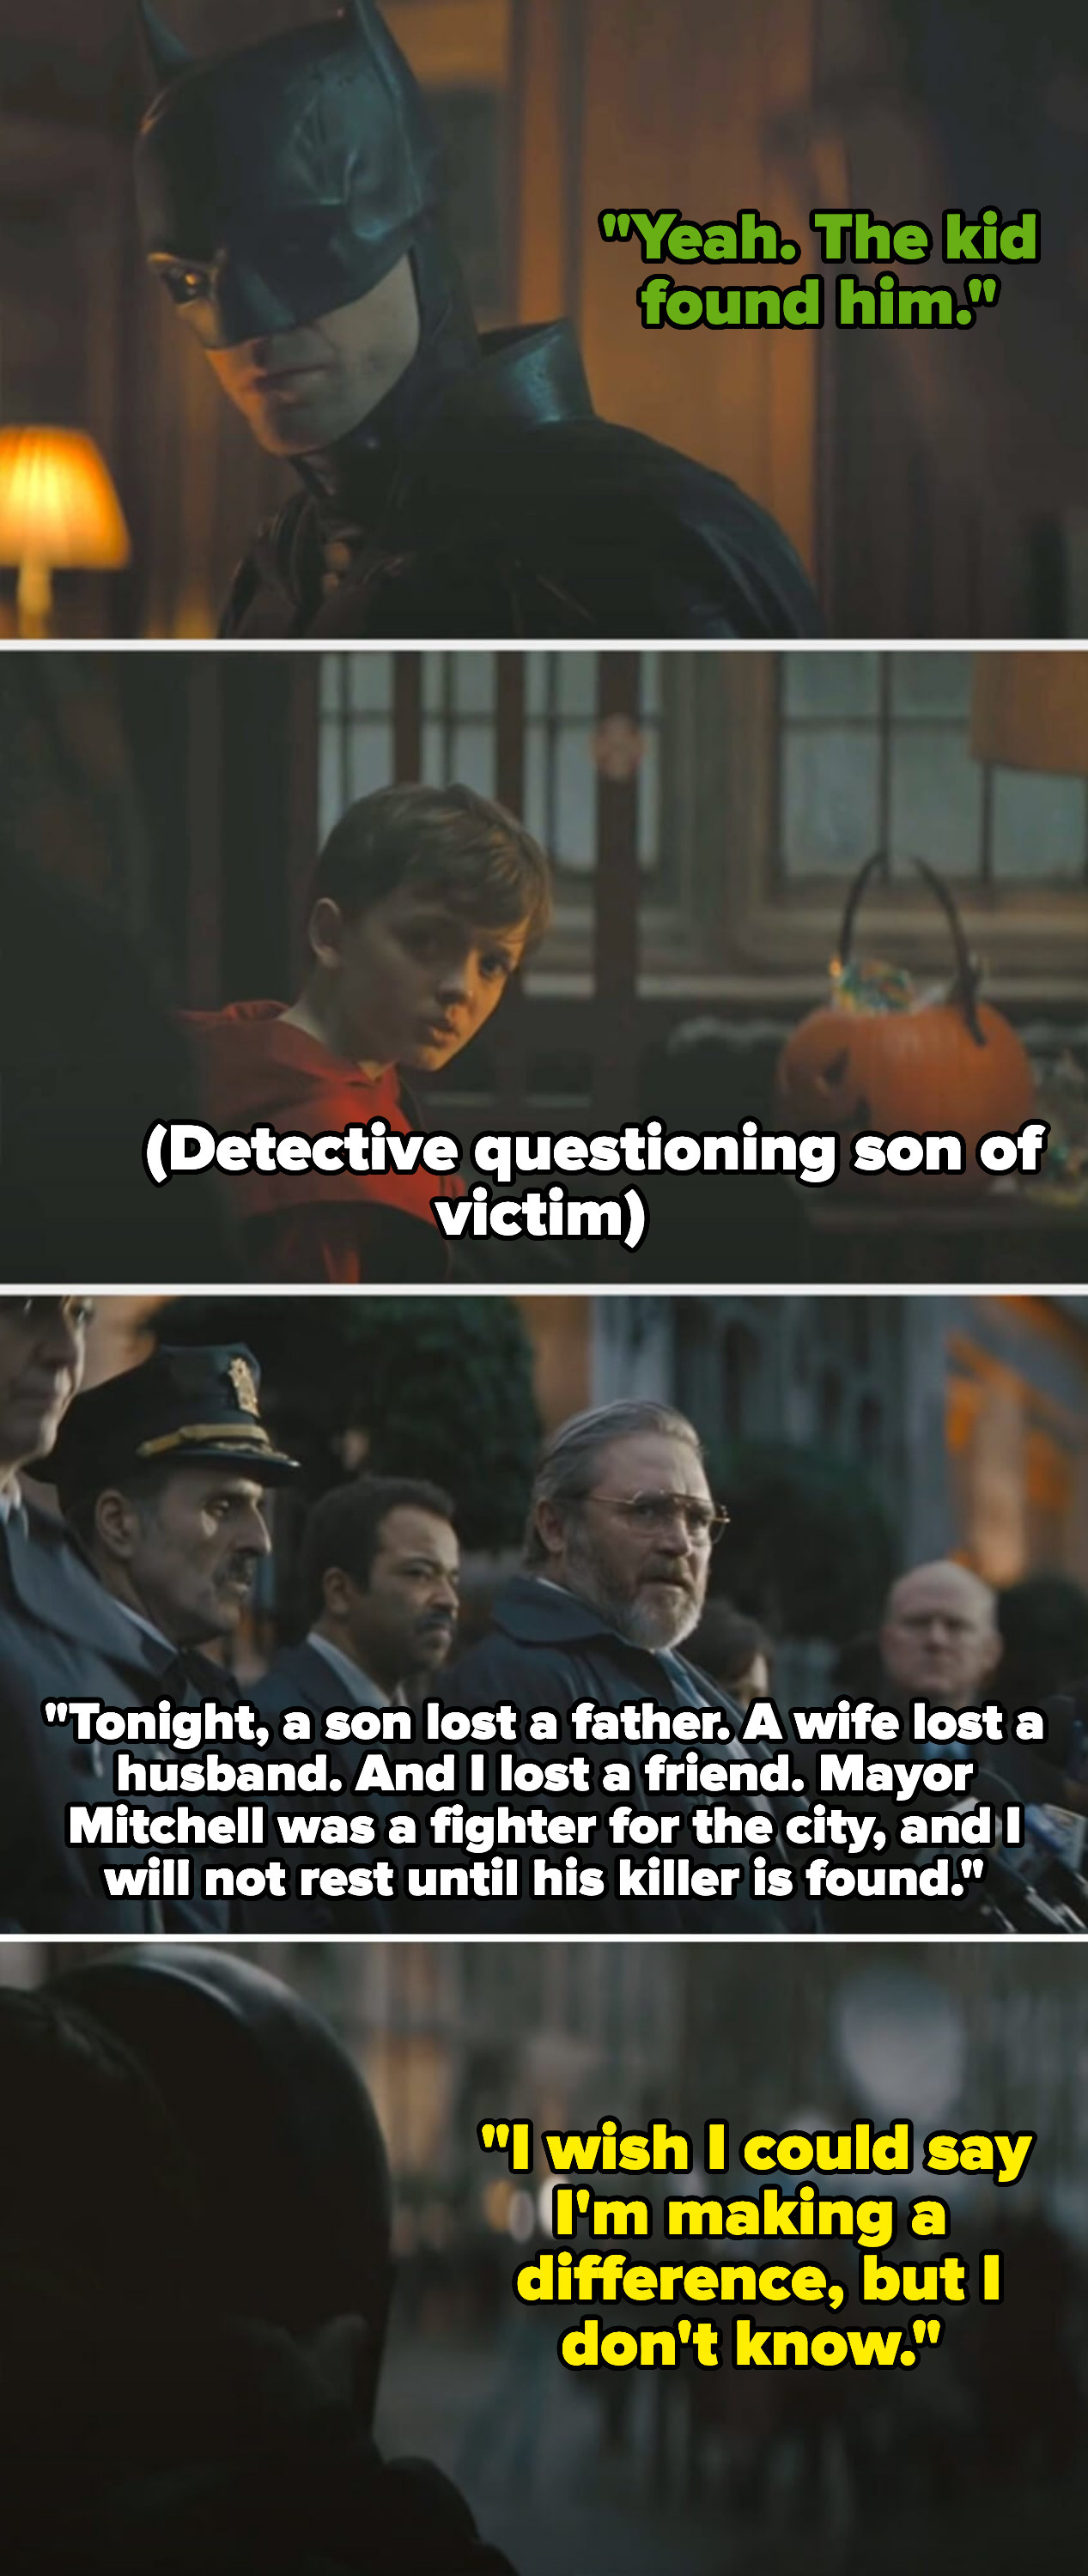 gordon tells bruce that the kid found his father, and bruce looks at the boy as he&#x27;s questioned. later, there&#x27;s a press conference on the mayor&#x27;s death, and in a voiceover, bruce says he wishes he could say he&#x27;s making a difference but he doesn&#x27;t know